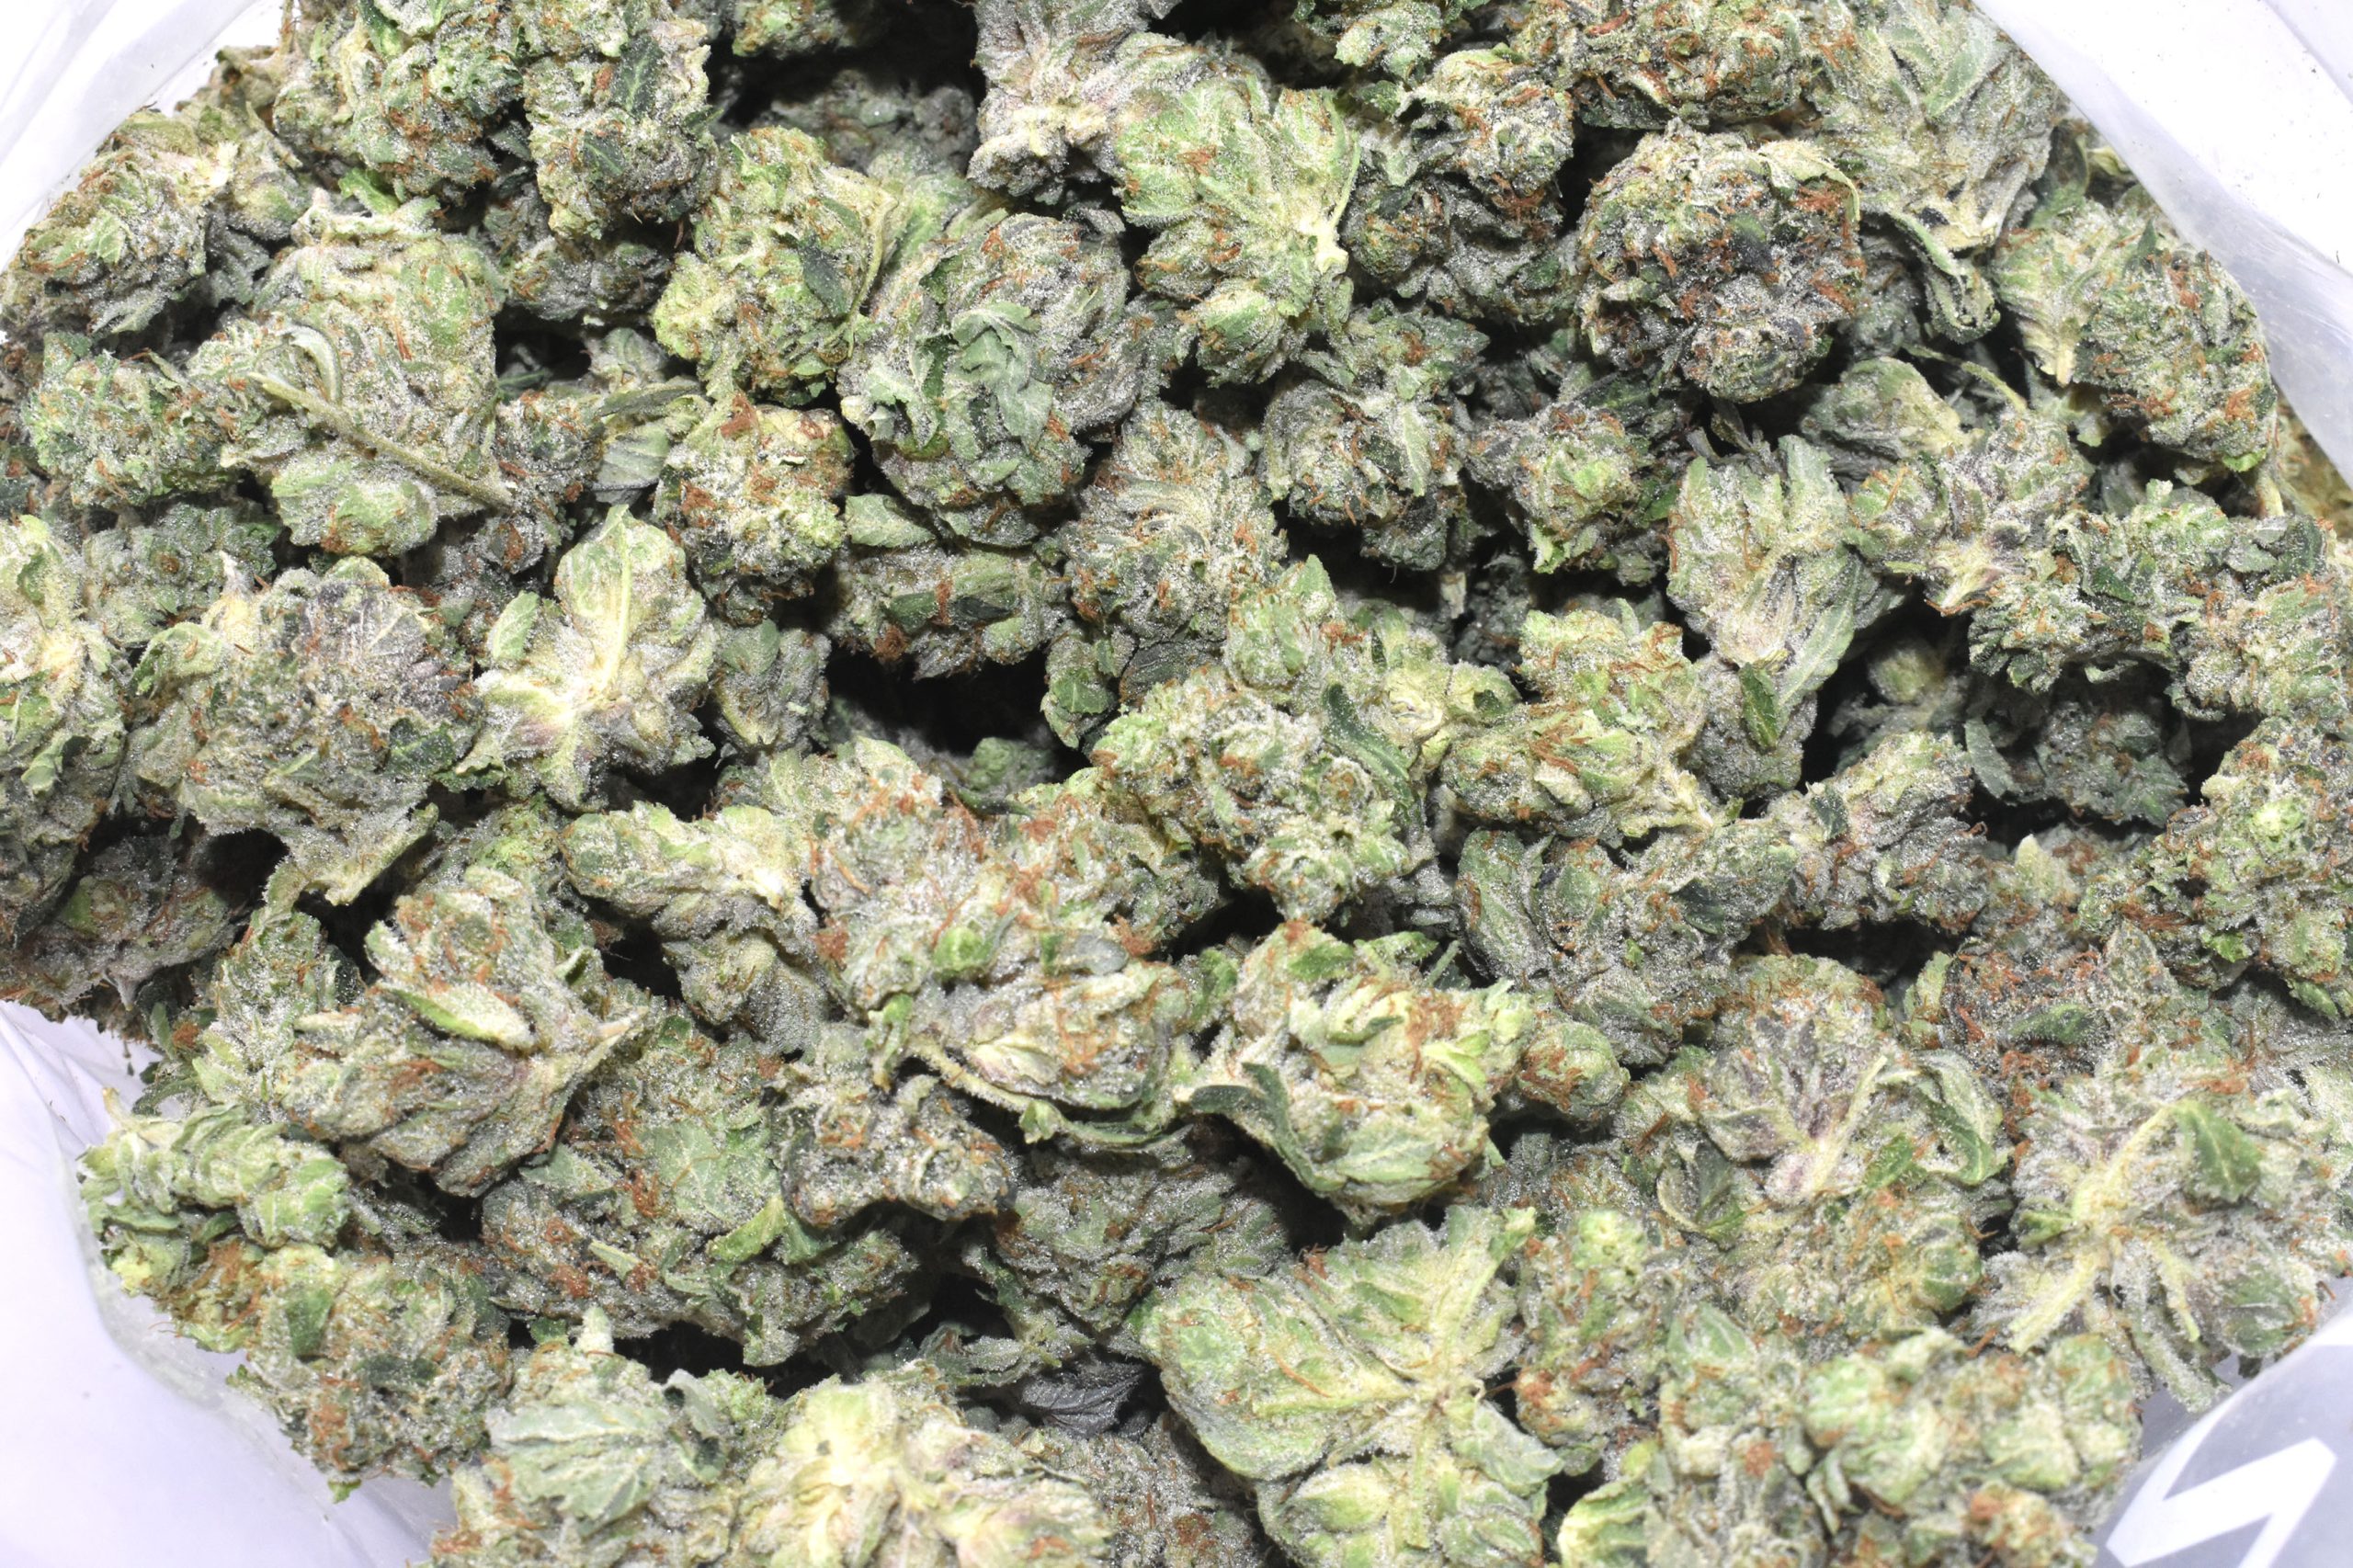 buy-purple-punch-online-at-chronicfarms.cc-online-weed-dispensary